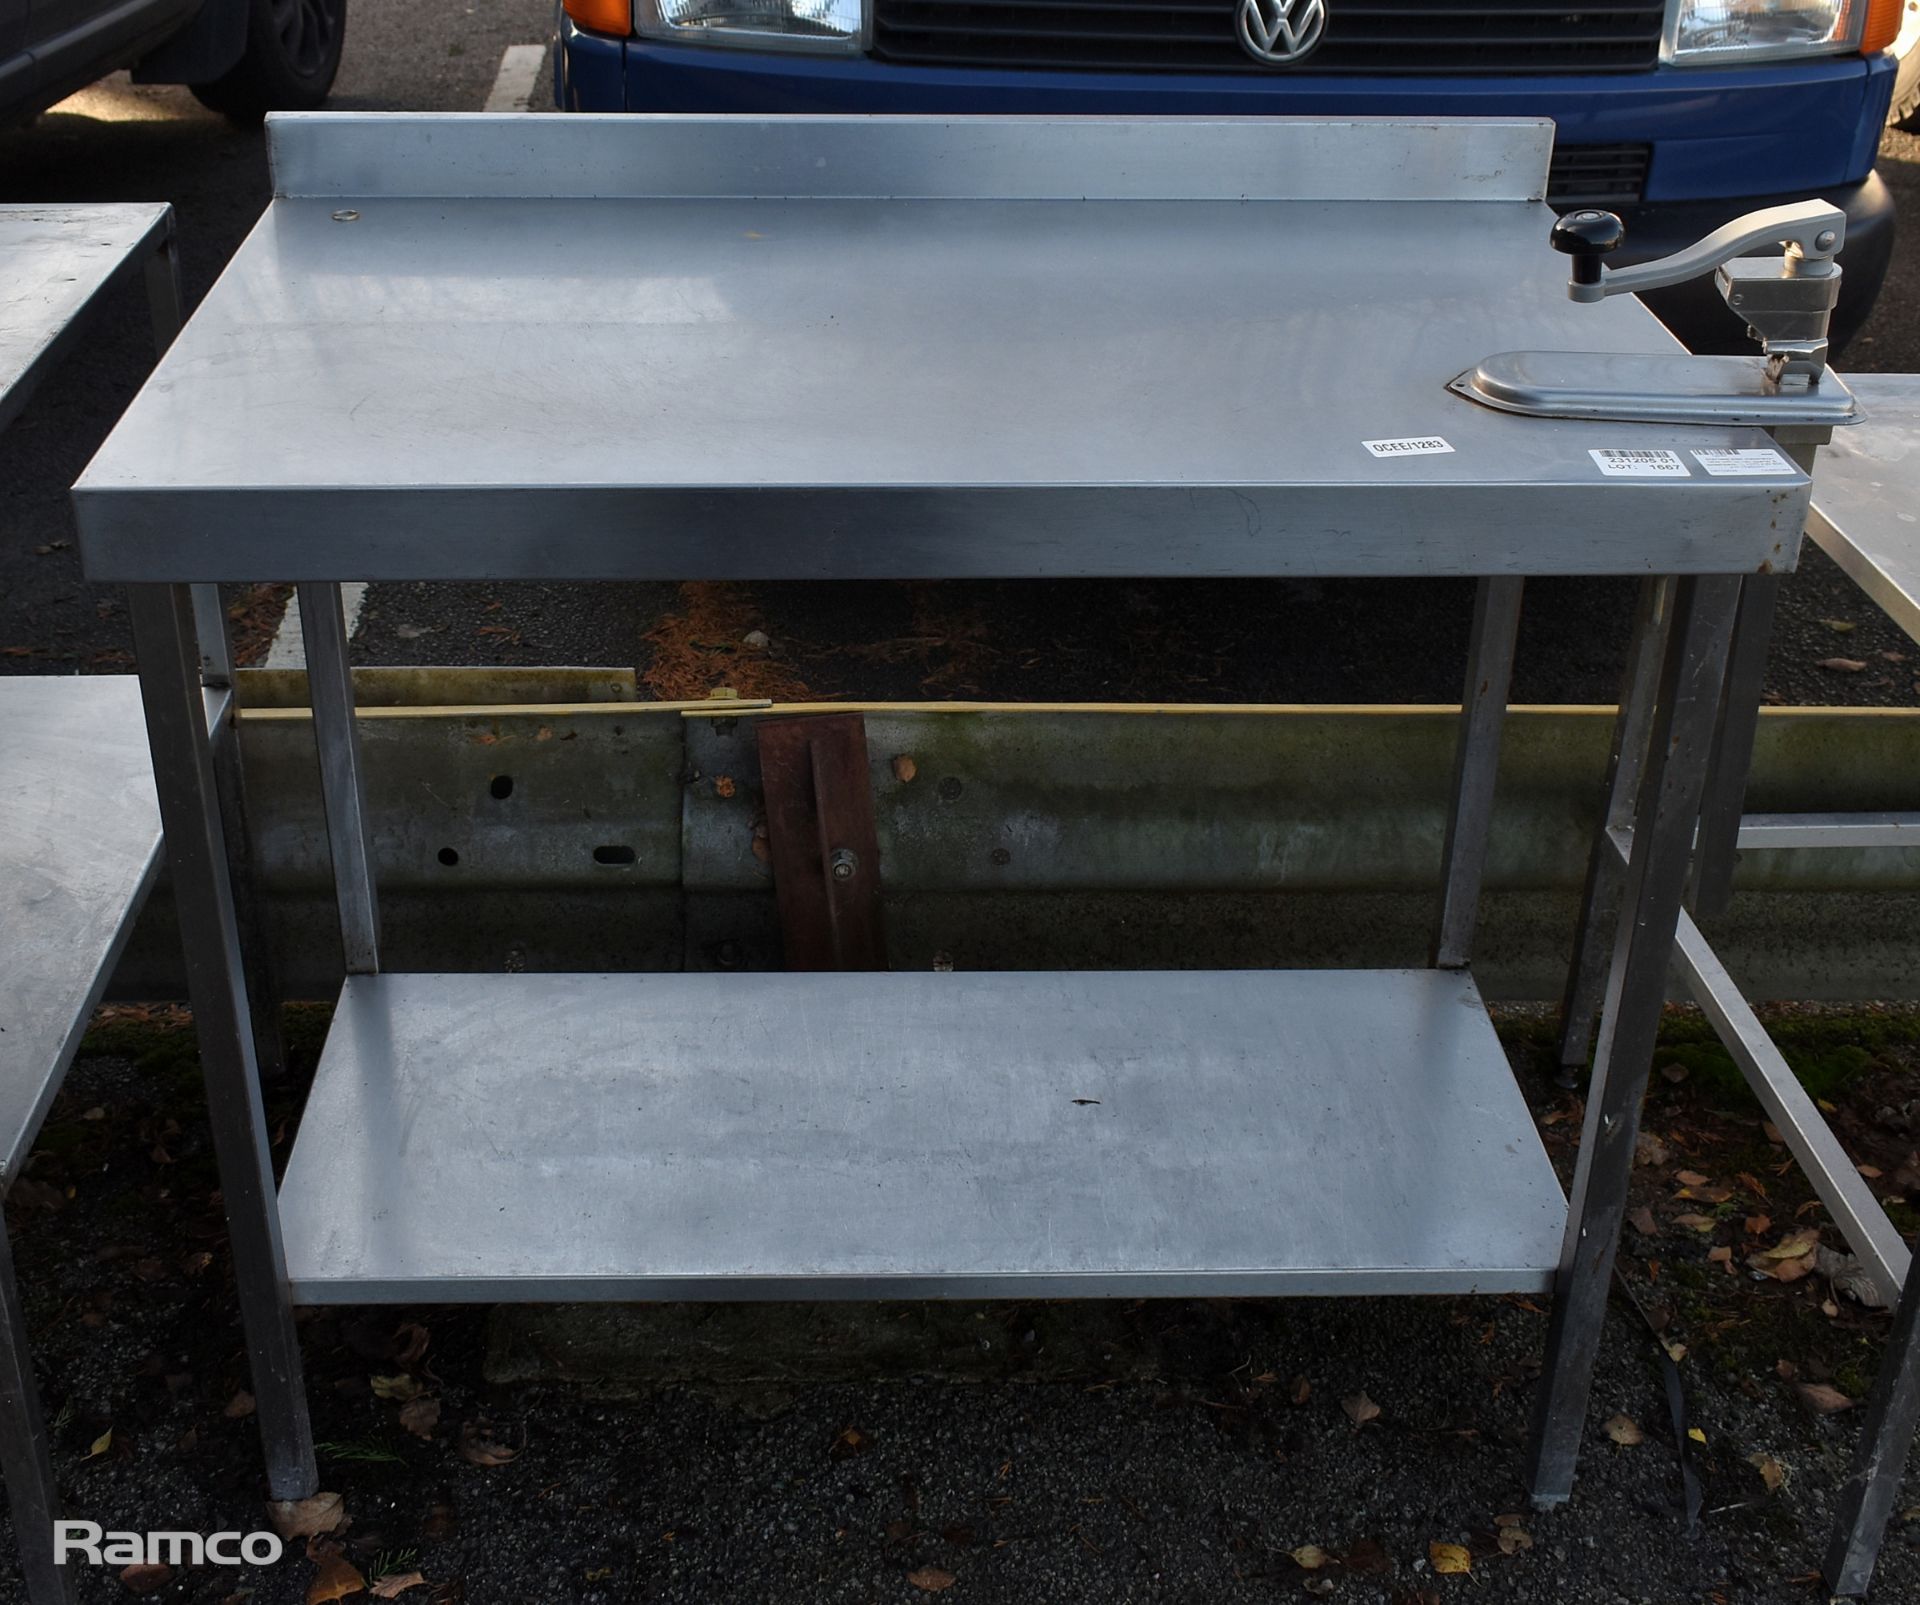 Stainless steel preparation table with tin can opener & splashback - L 1070 x W 600 x H 1020mm